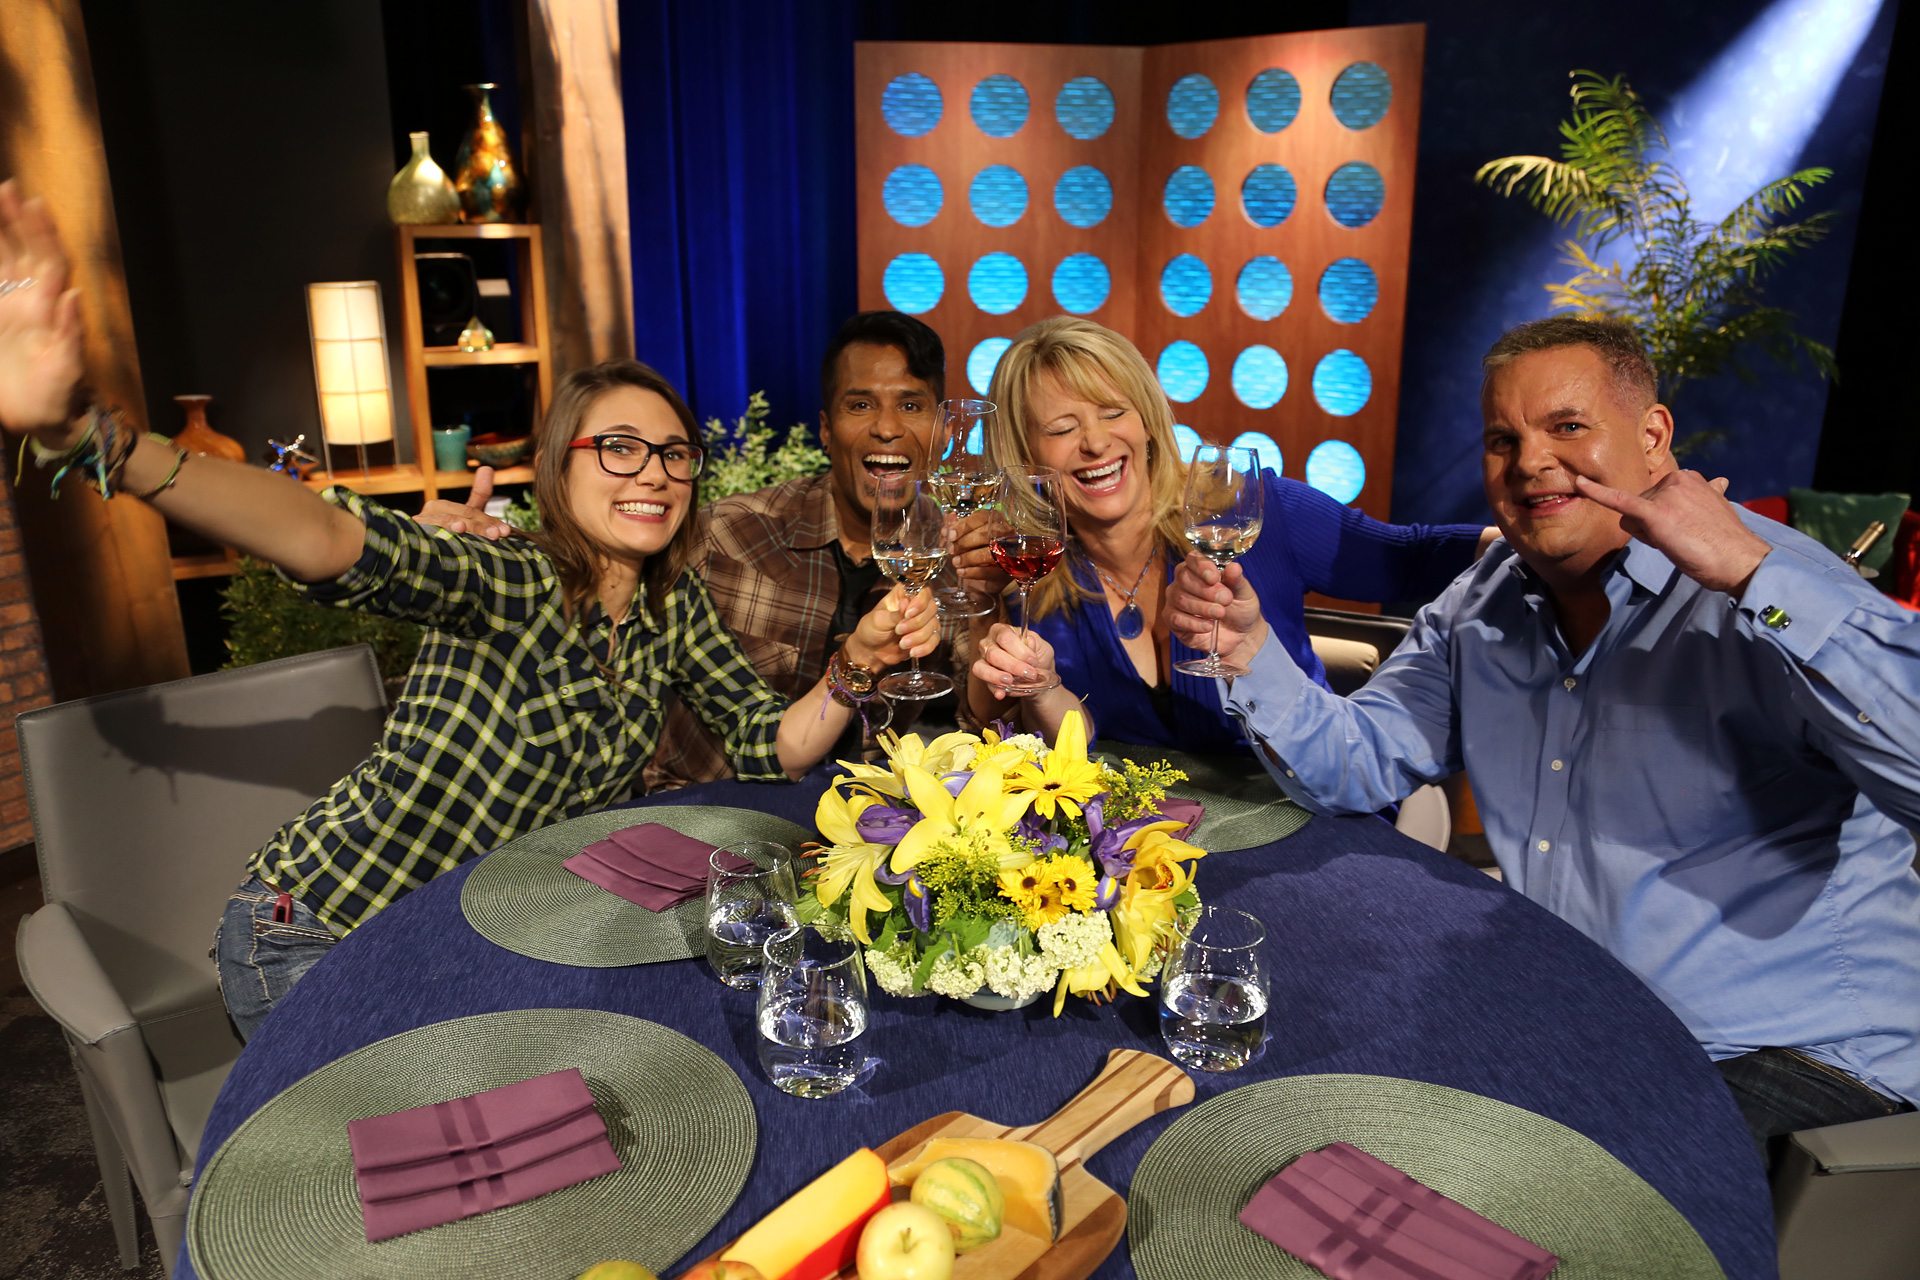 Host Leslie Sbrocco and guests having fun on the set of the episode 11 of season 14.